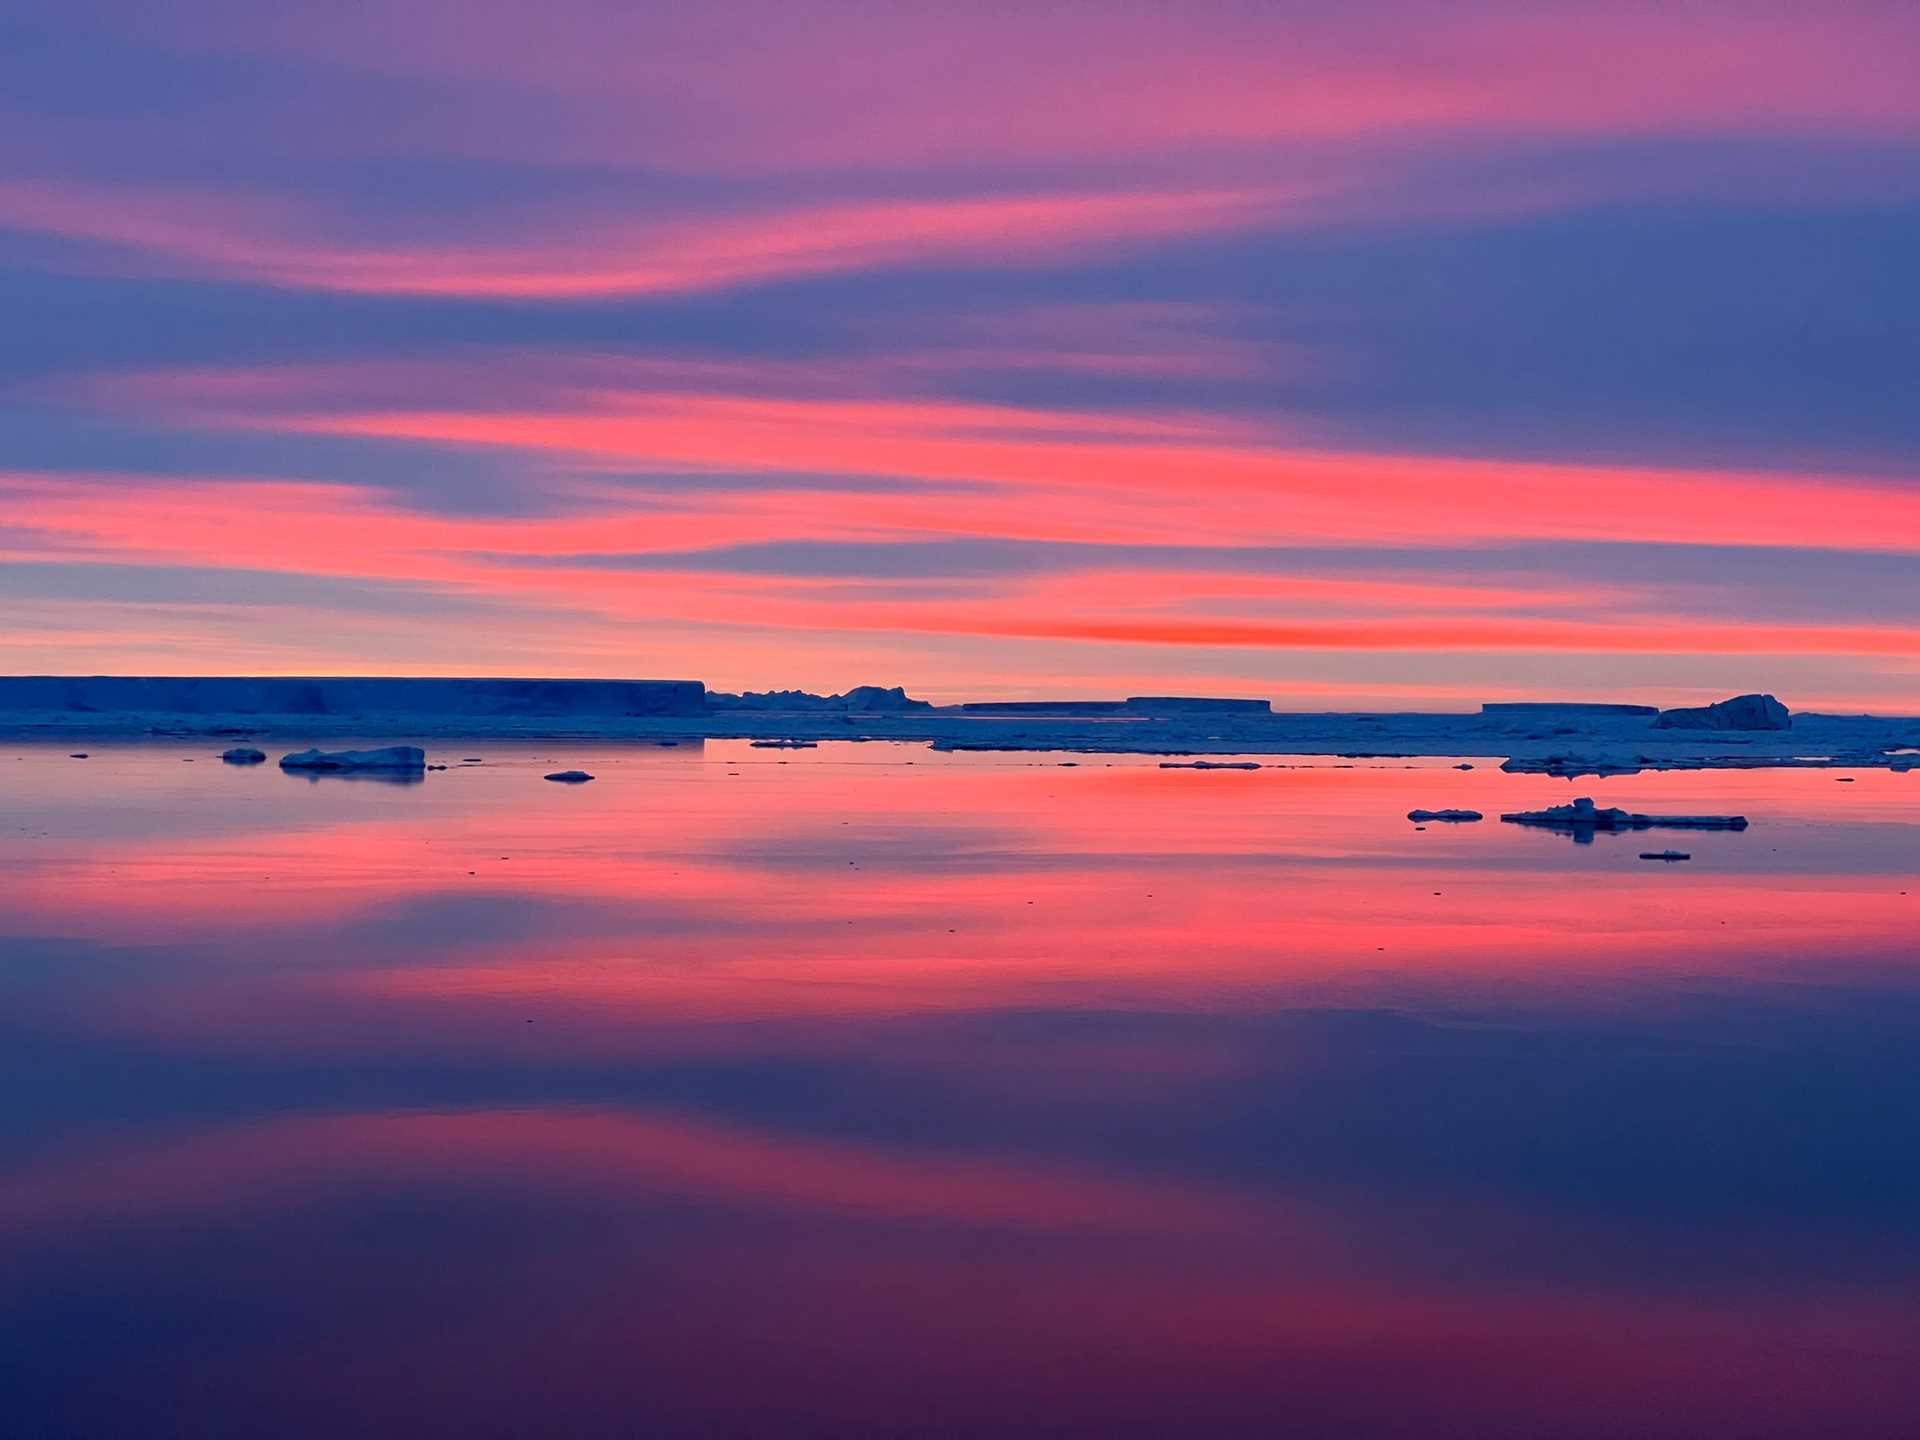 antarctic ice in a pink and purple sunset